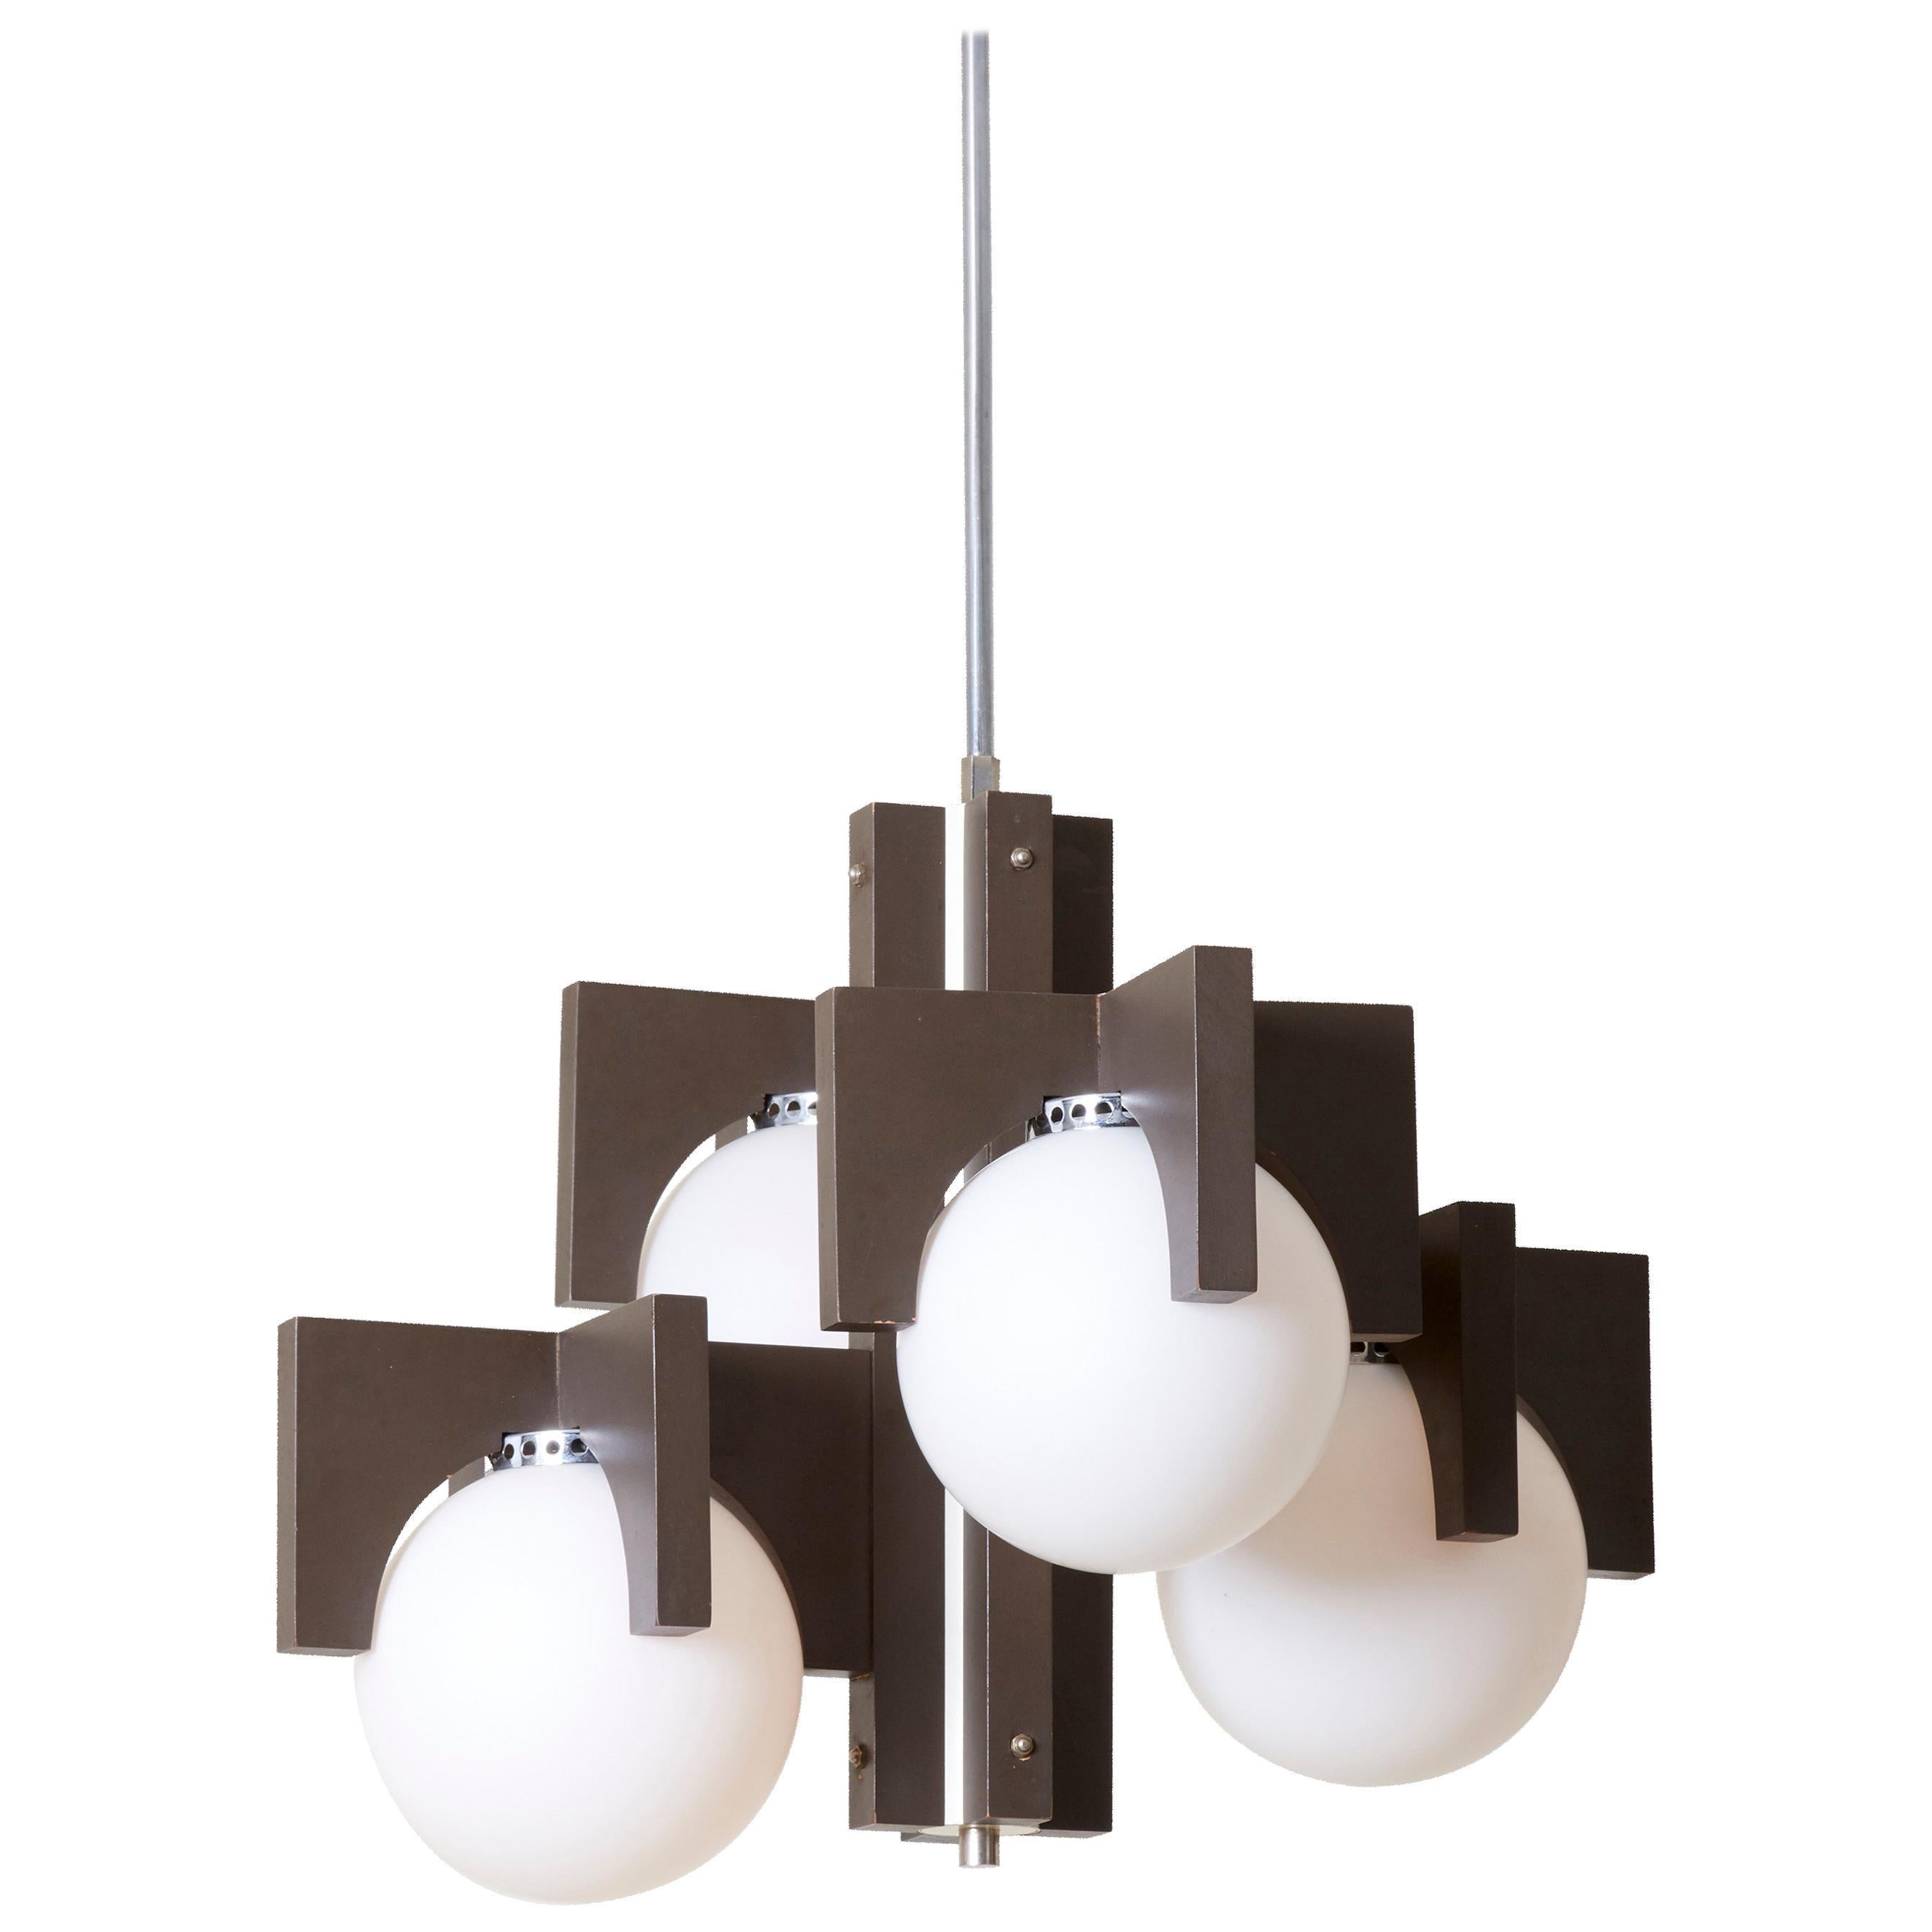 Architectural Pendant Lamp or Chandelier For Sale